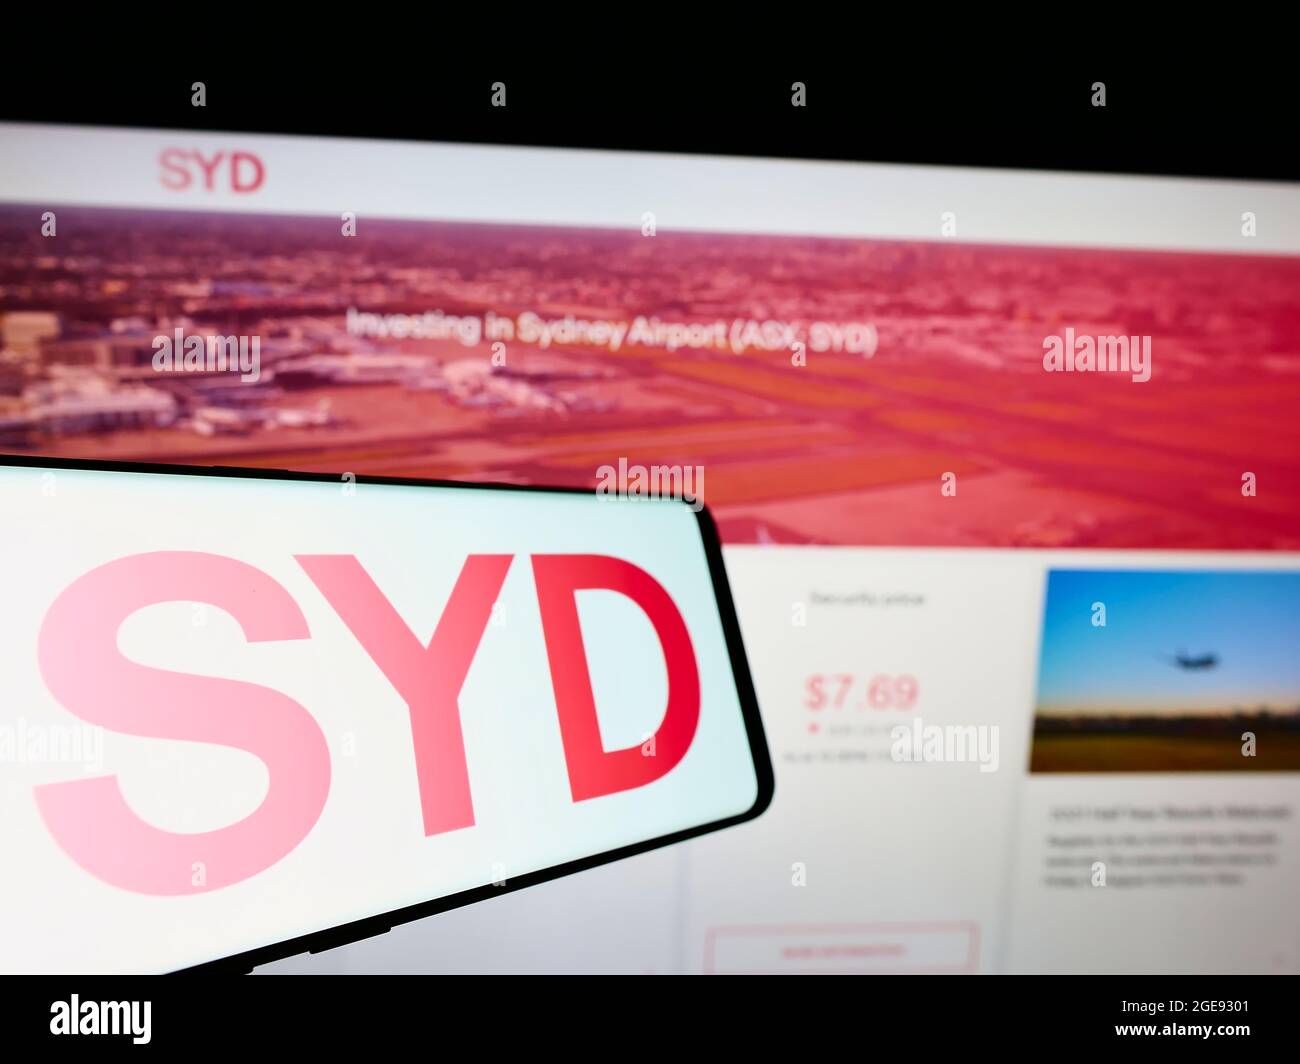 Smartphone with logo of Australian company Sydney Airport Holdings Pty Ltd on screen in front of website. Focus on center-right of phone display. Stock Photo